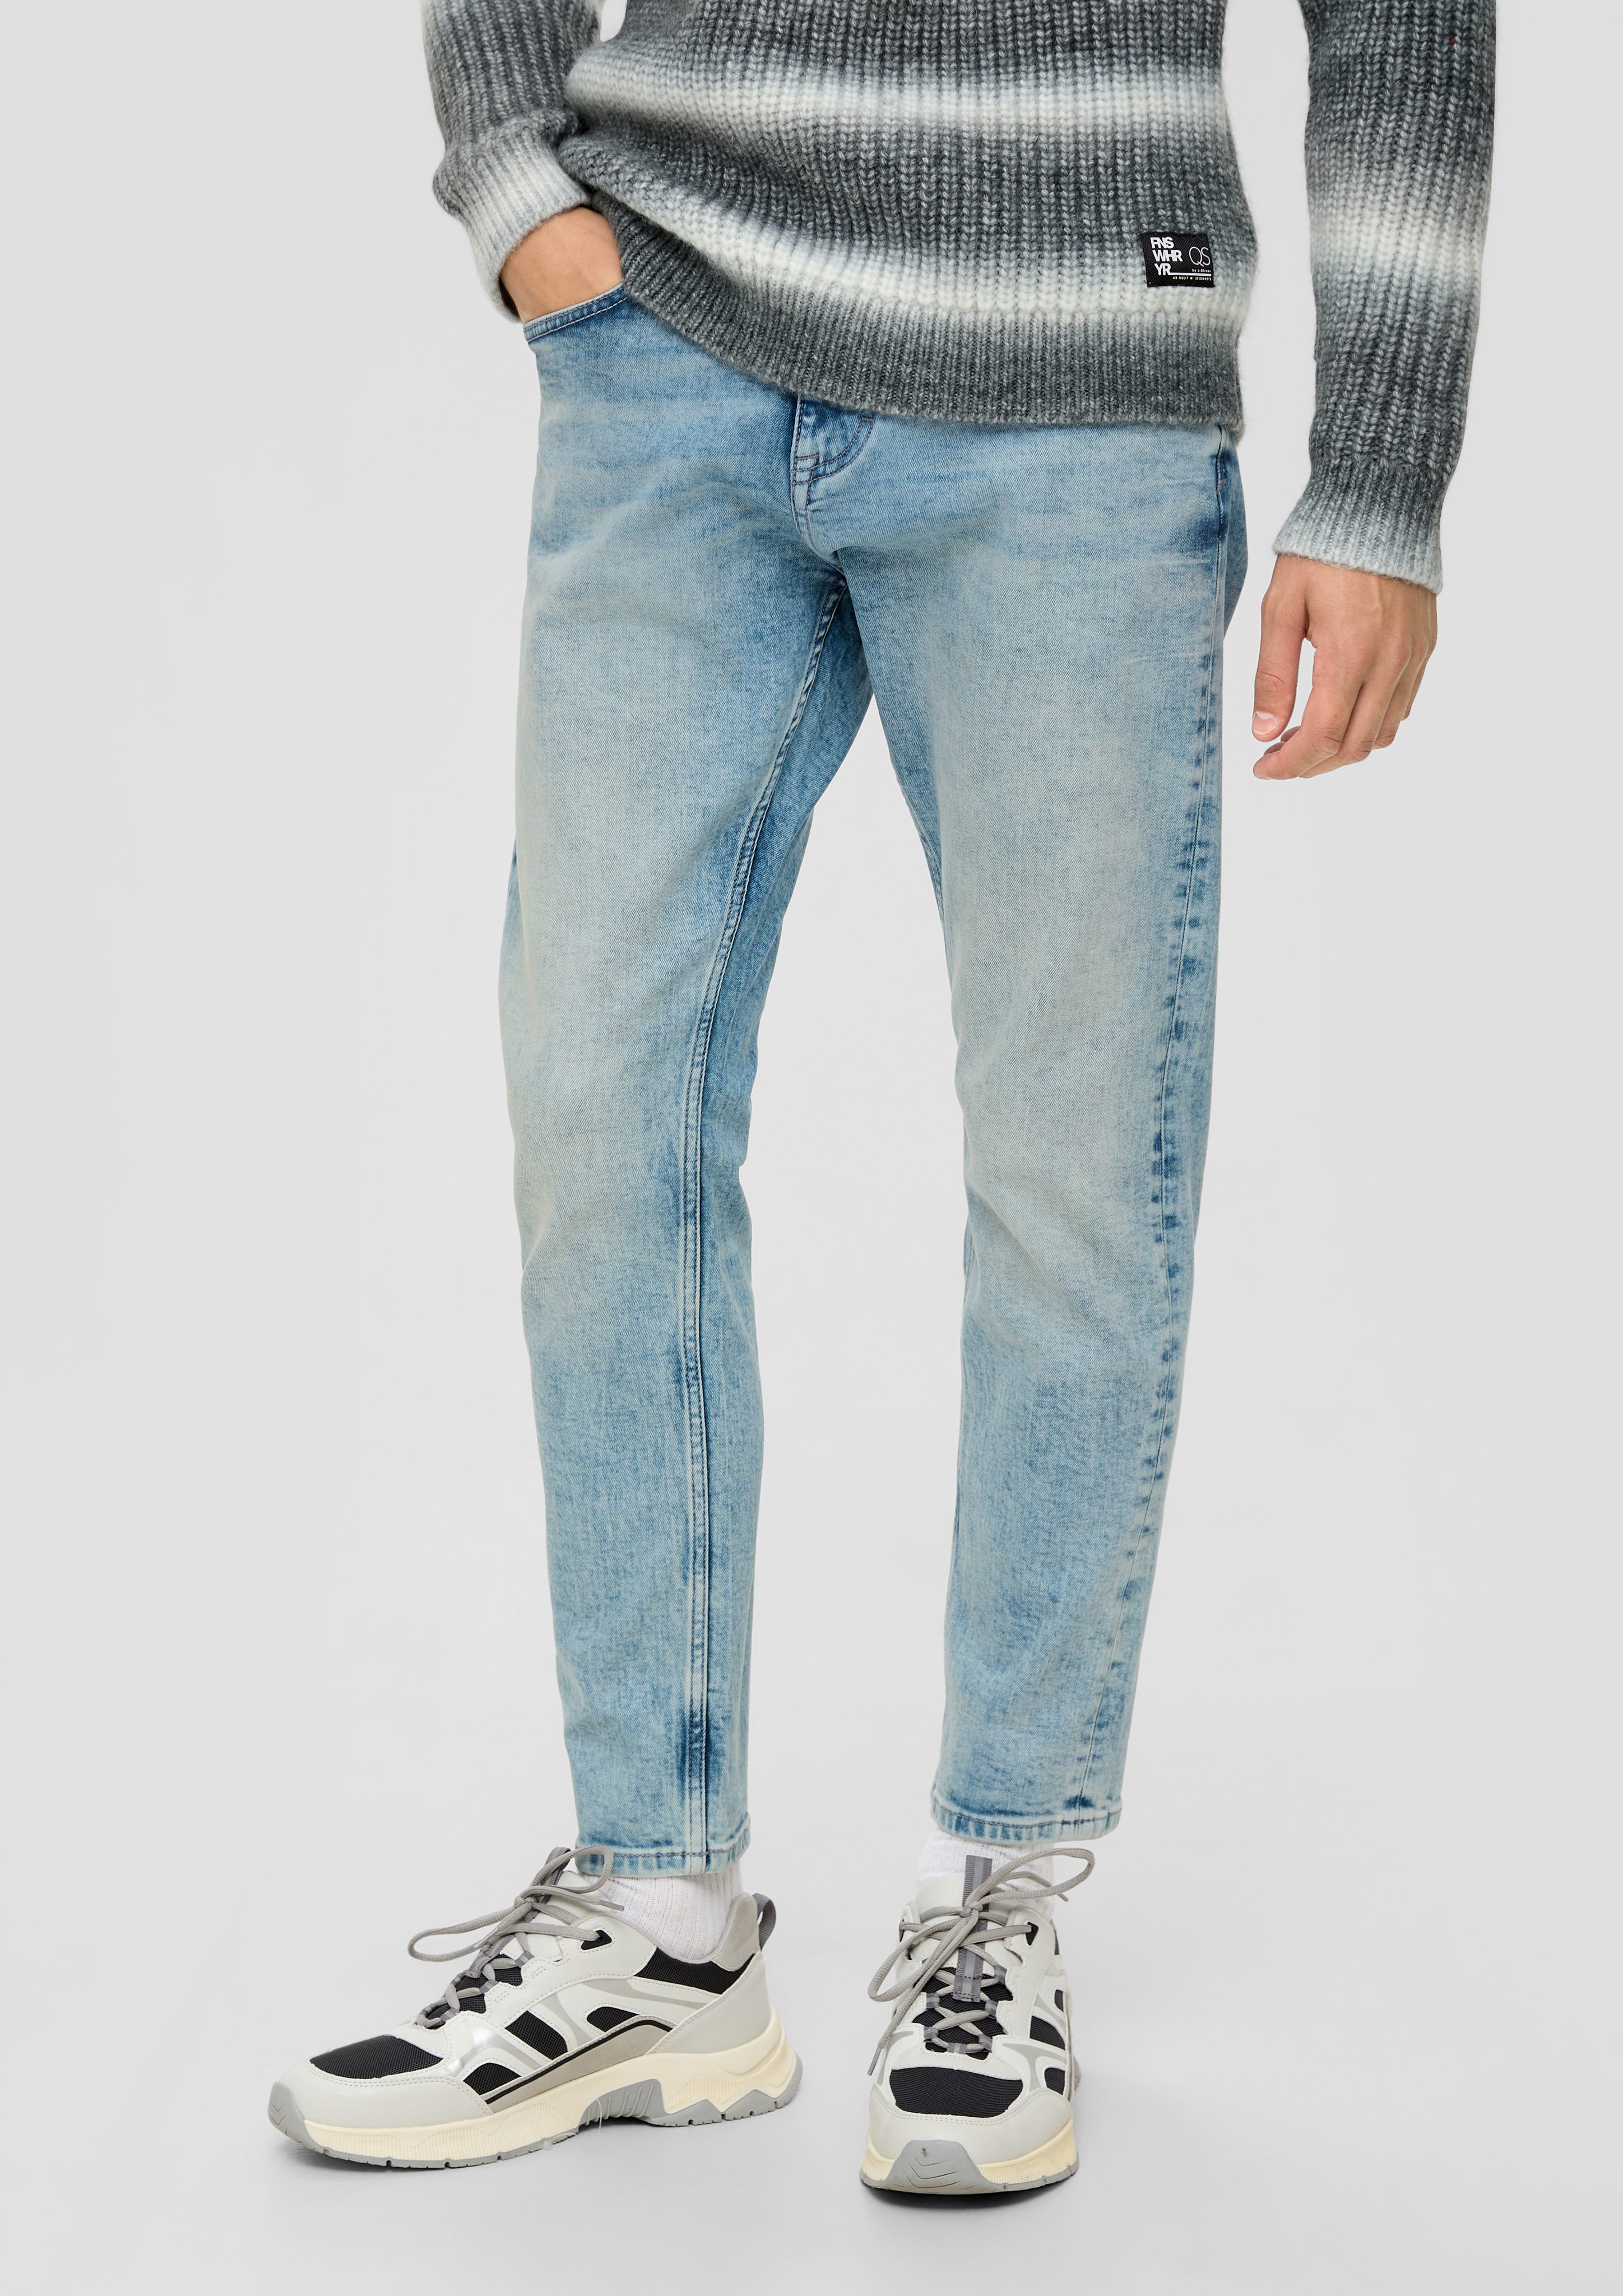 / Stoffhose QS Fit Jeans Mid Waschung Rick Slim Slim / Leg / Rise Label-Patch,